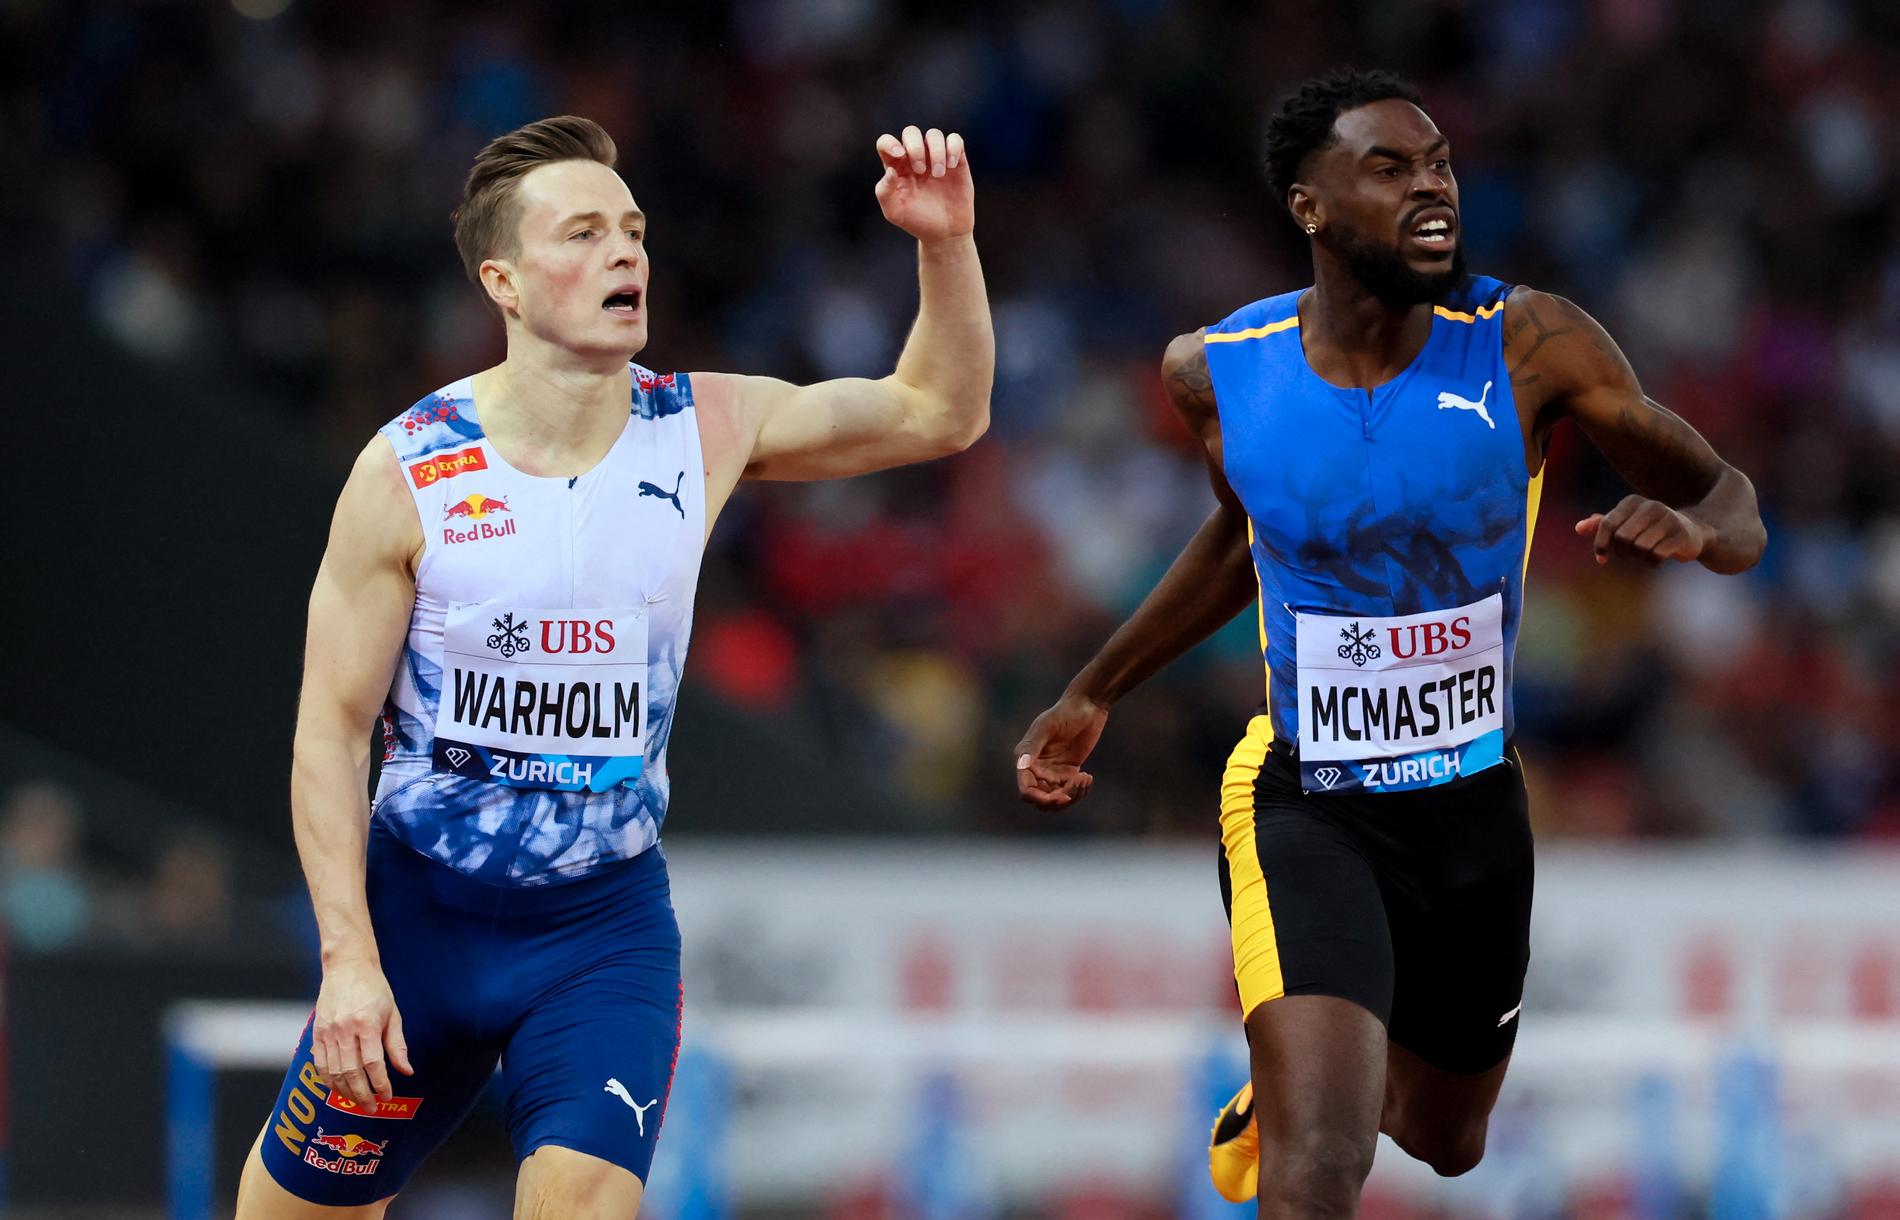 Athletics: Carsten Warholm is ready for the Diamond League Finals in Eugene, USA